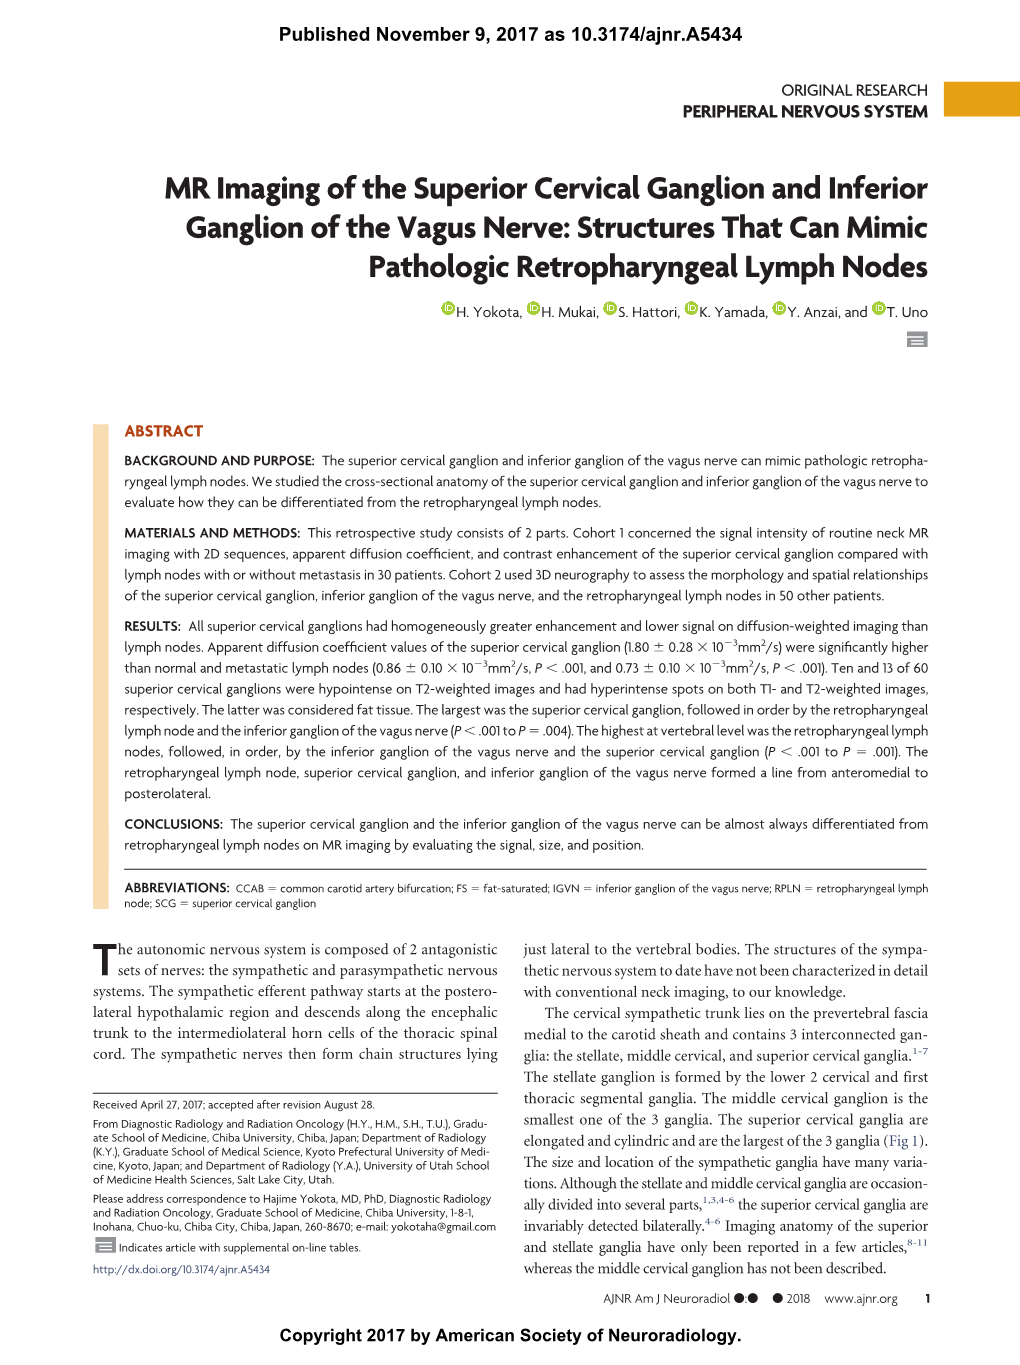 MR Imaging of the Superior Cervical Ganglion and Inferior Ganglion of the Vagus Nerve: Structures That Can Mimic Pathologic Retropharyngeal Lymph Nodes